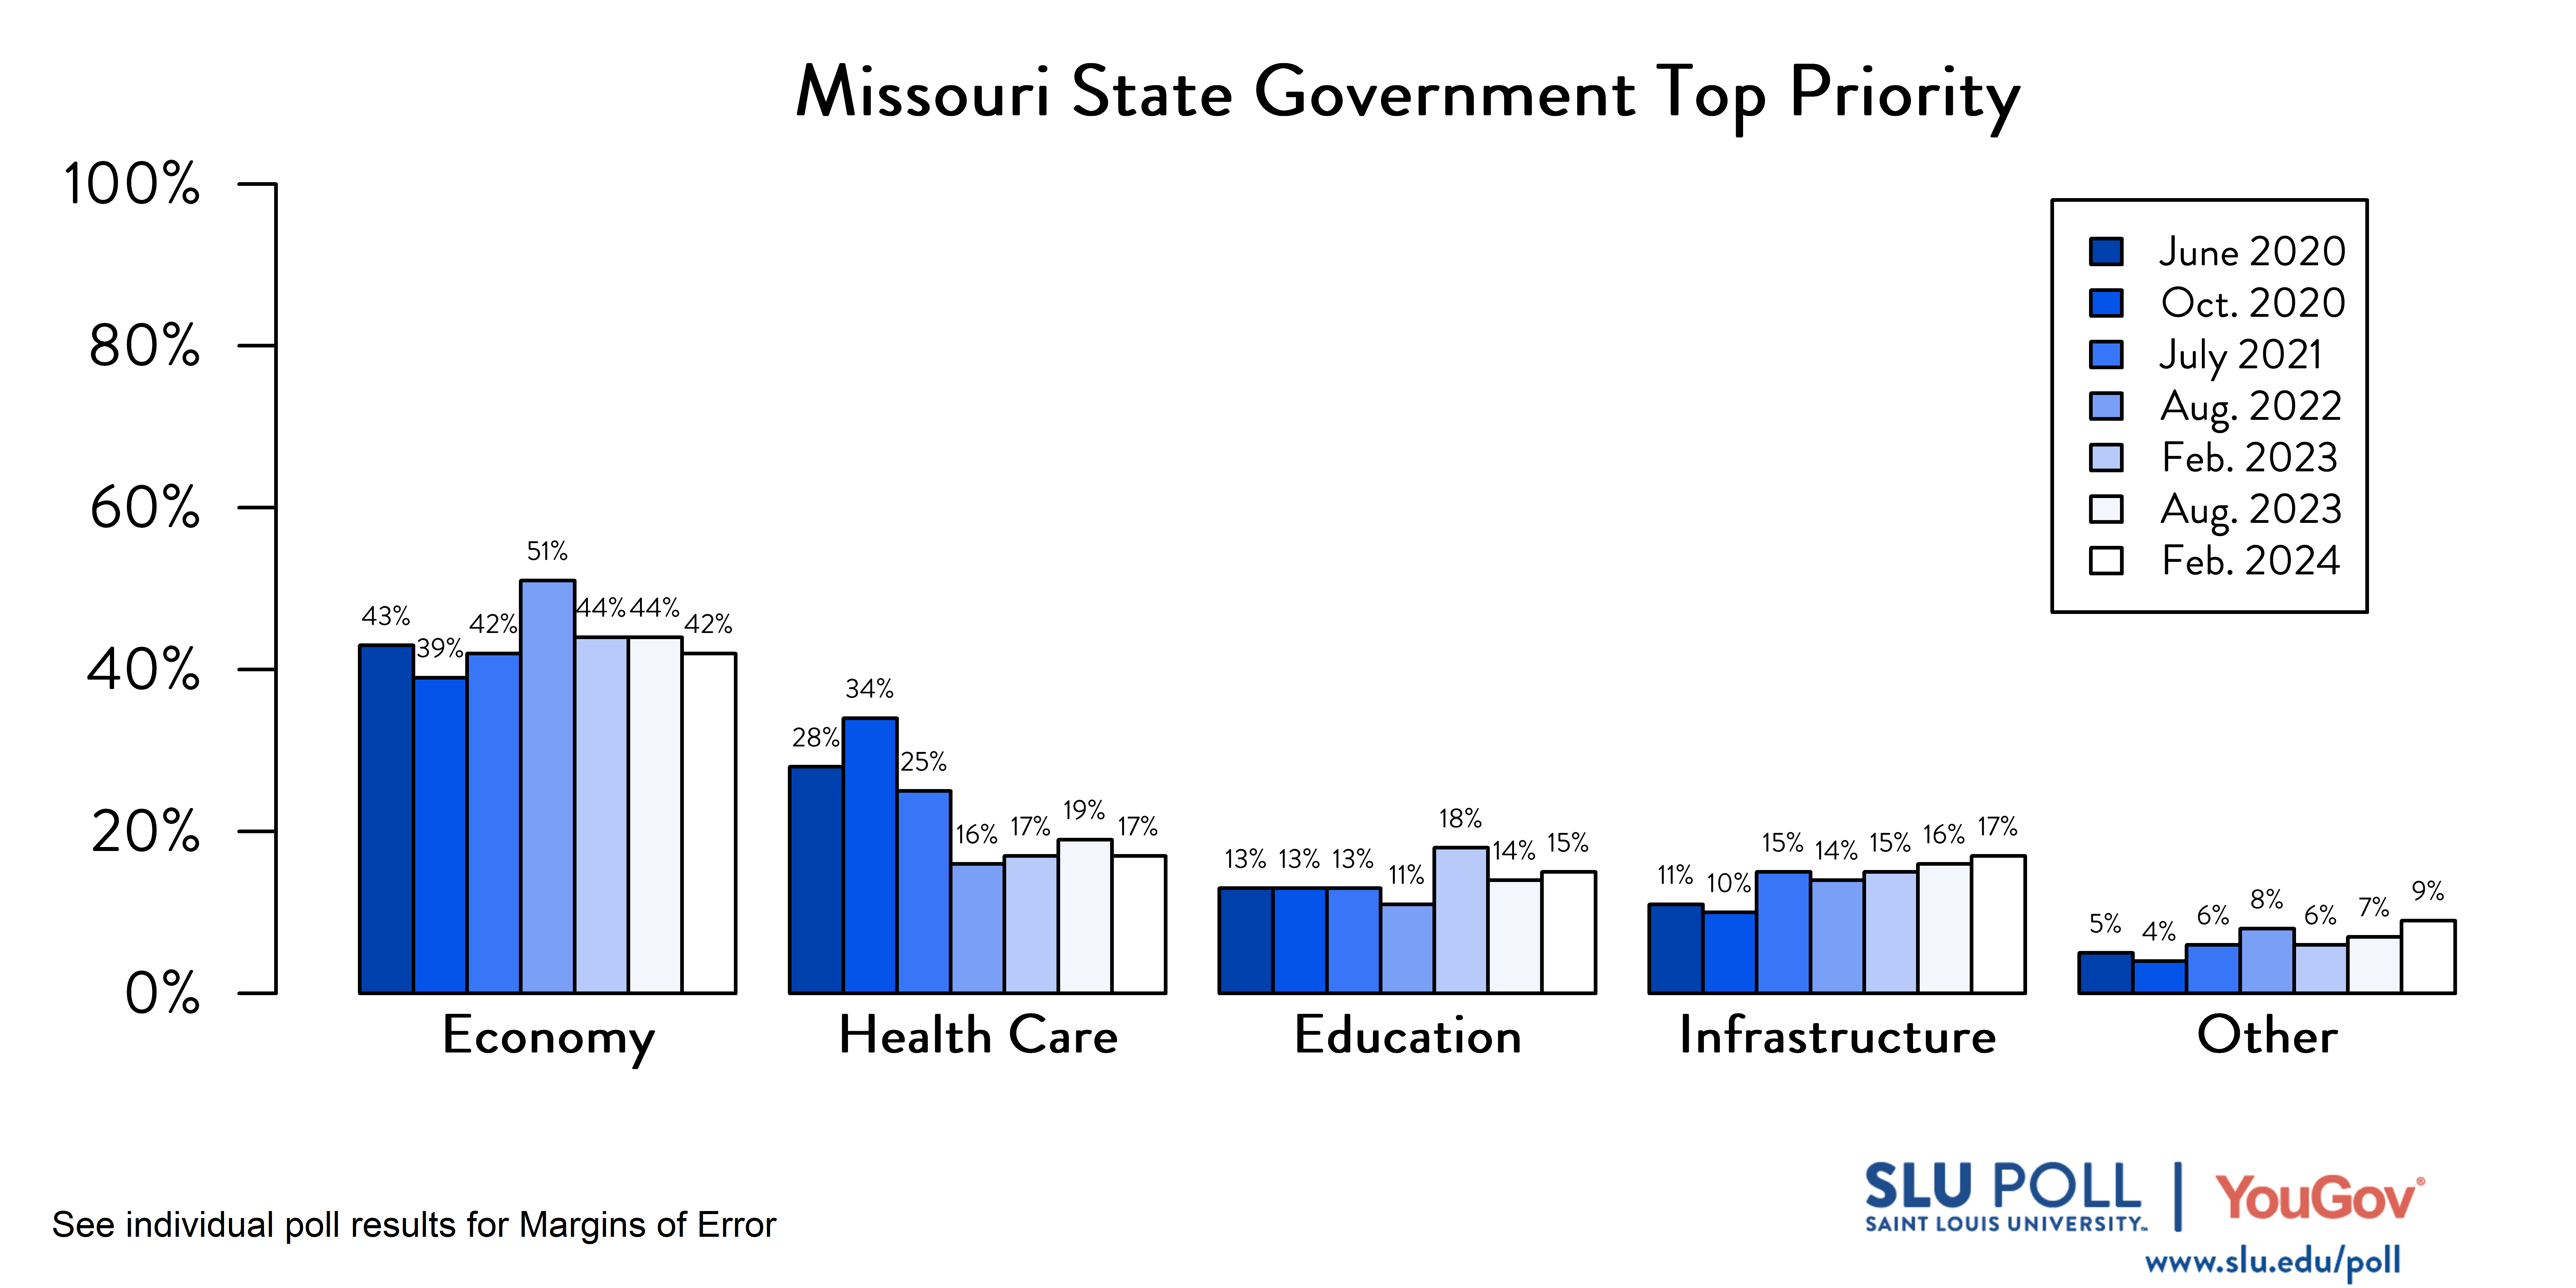 Likely voters' responses to 'Which of the following do you think should be the TOP priority of the Missouri state government?'. June 2020 Voter Responses 43% Economy, 28% Health Care, 13% Education, 11% Infrastructure, and 5% Other. October 2020 Voter Responses: 39% Economy, 34% Health care, 13% Education, 10% Infrastructure, and 4% Other. July 2021 Voter Responses: 42% Economy, 25% Health care, 13% Education, 15% Infrastructure, and 6% Other. August 2022 Voter Responses: 51% Economy, 16% Health care, 11% Education, 14% Infrastructure, and 8% Other. February 2023 Voter Responses: 44% Economy, 17% Health care, 18% Education, 15% Infrastructure, and 6% Other. February 2024 Voter Responses: 42% Economy, 17% Health care, 15% Education, 17% Infrastructure, and 9% Other.